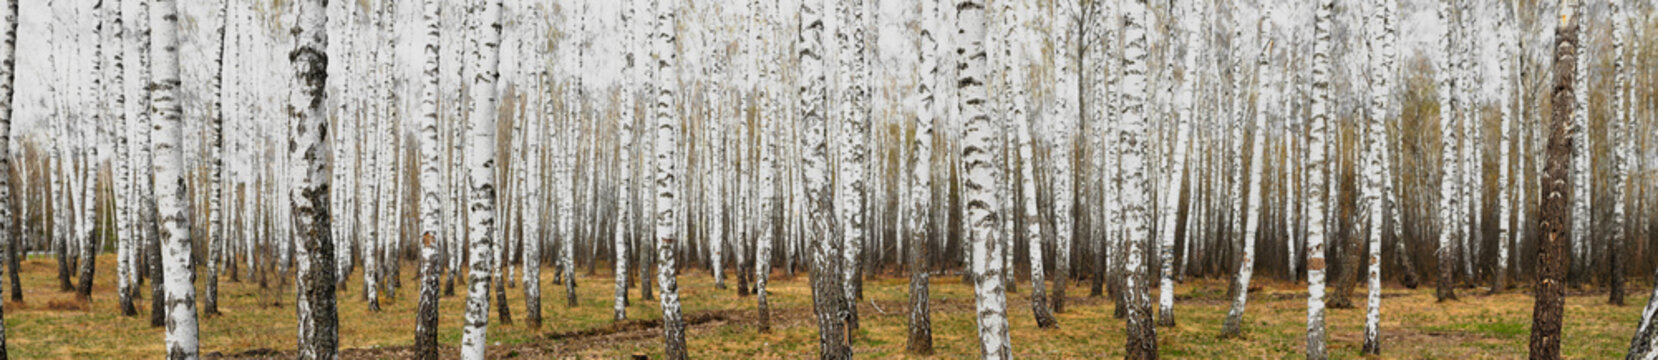 White birch grove in the spring. background